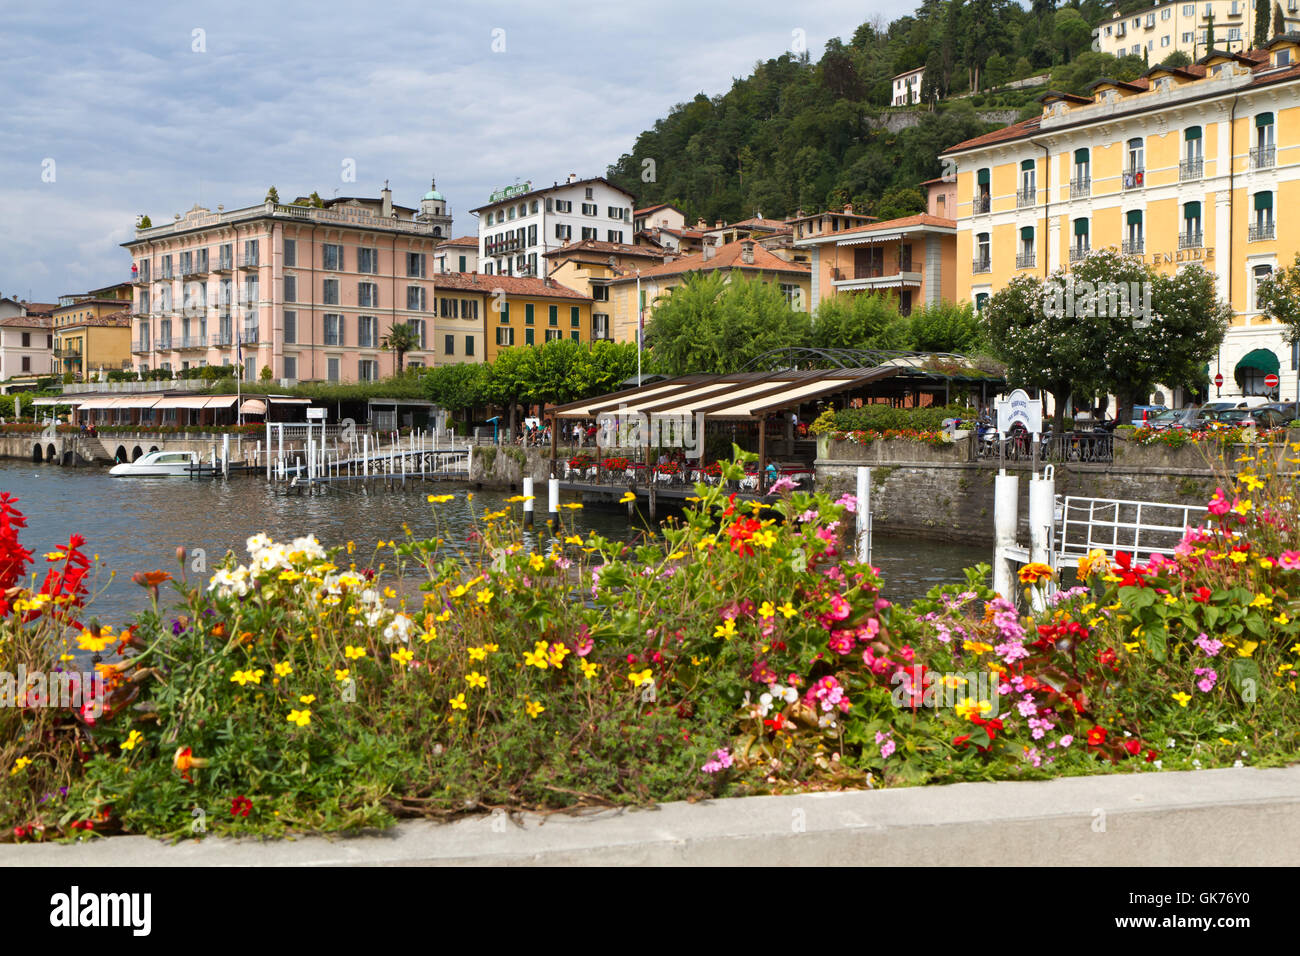 the place belaggio on lake como,northern italy Stock Photo